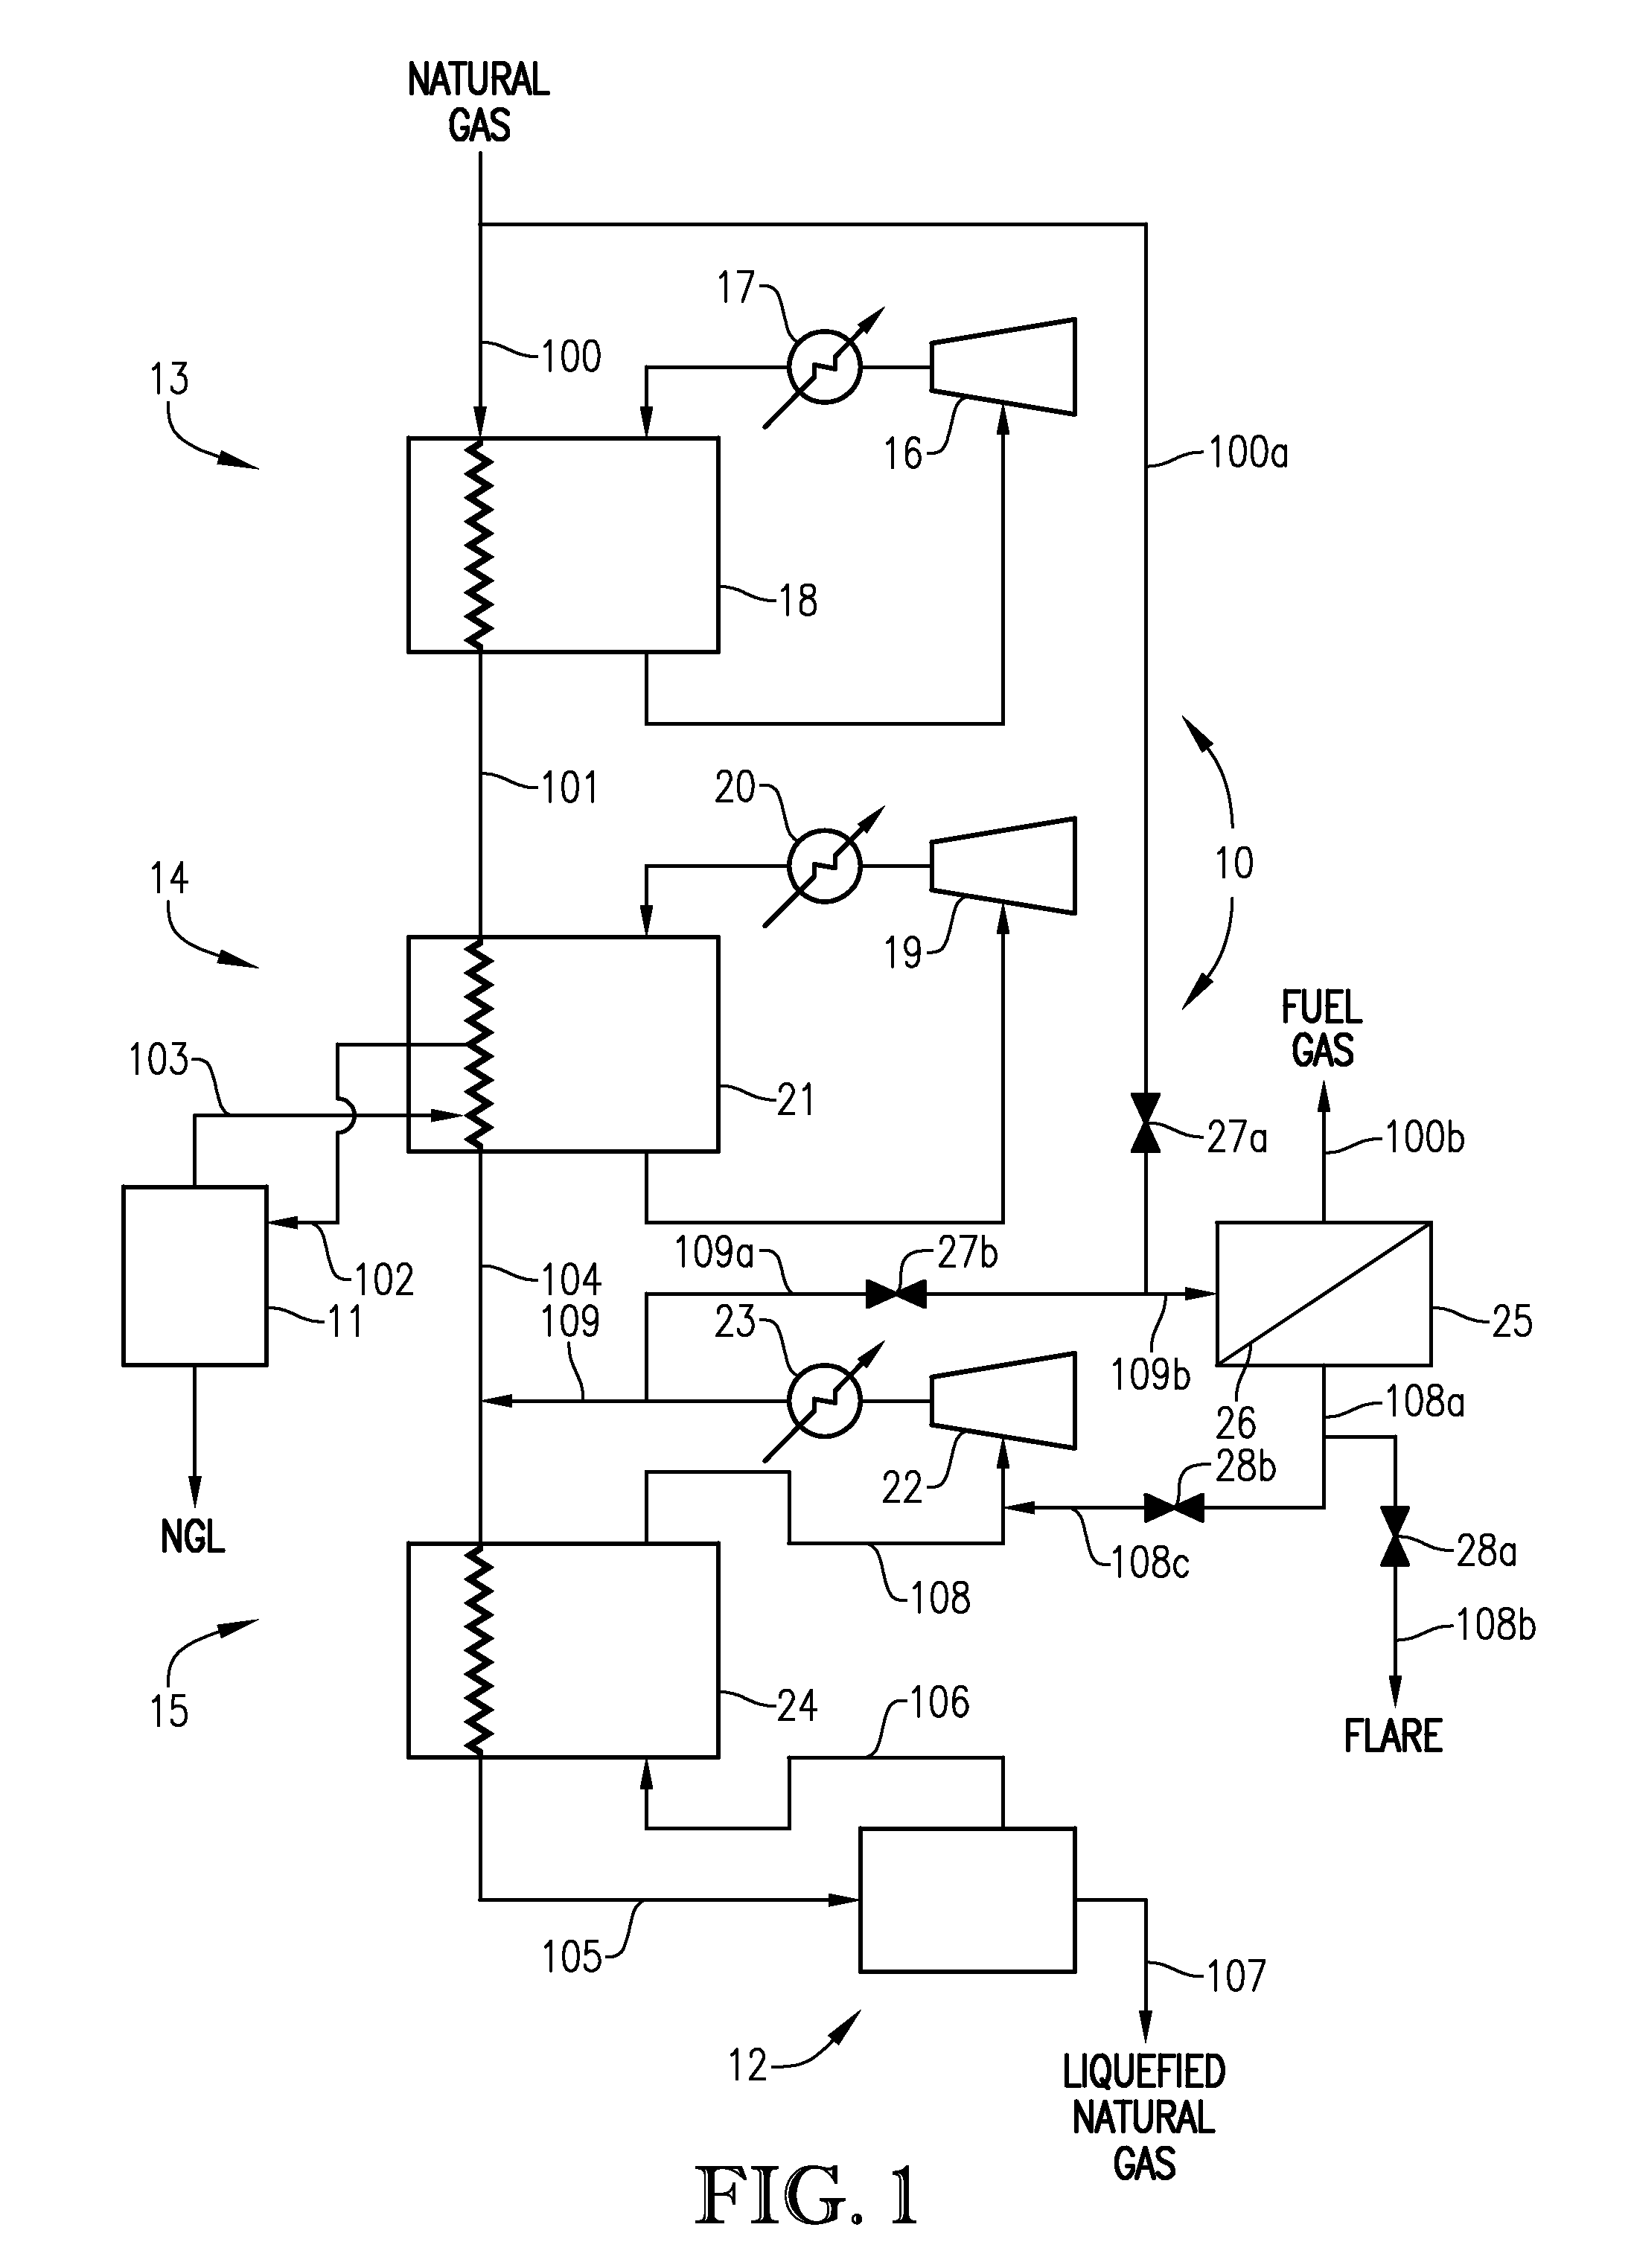 System for enhanced fuel gas composition control in an LNG facility